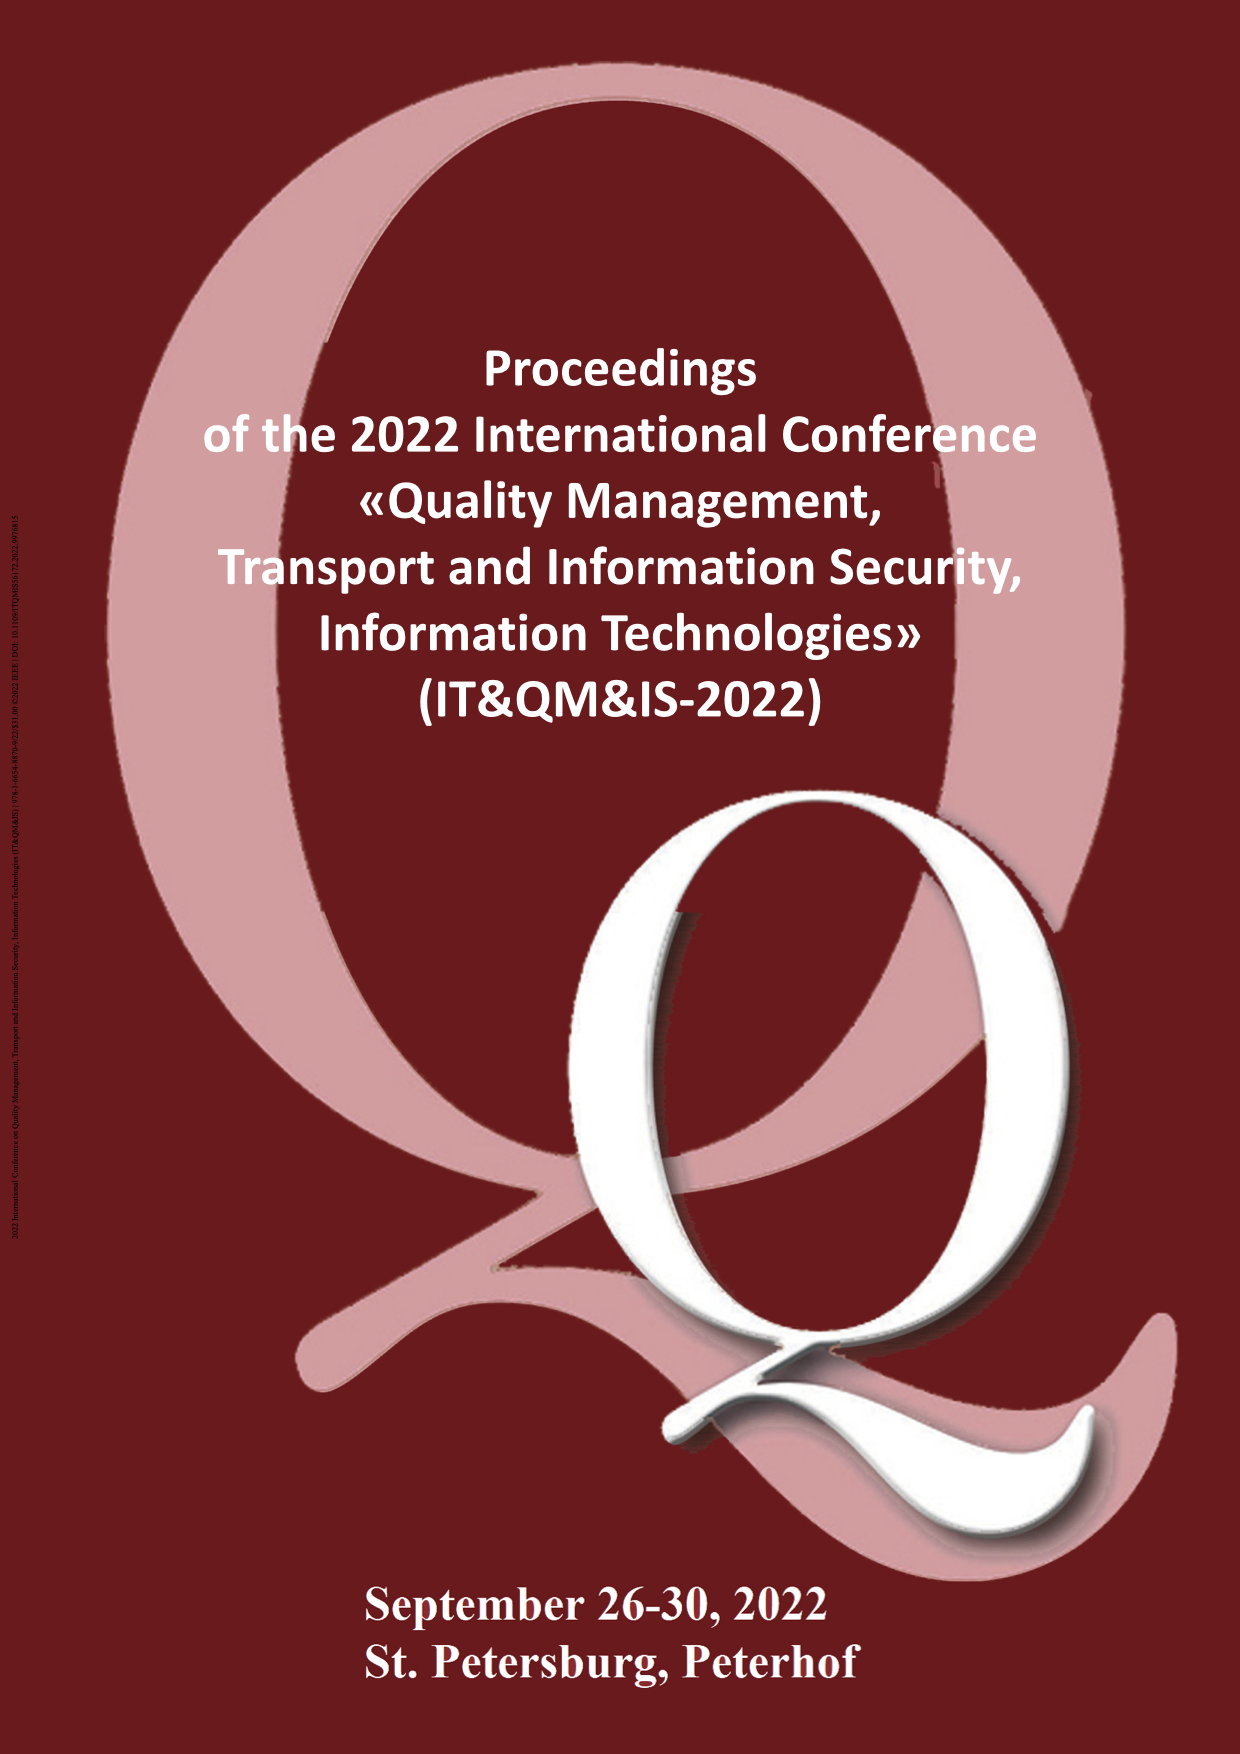 2022 International Conference on Quality Management, Transport and Information Security, Information Technologies (IT&QM&IS)